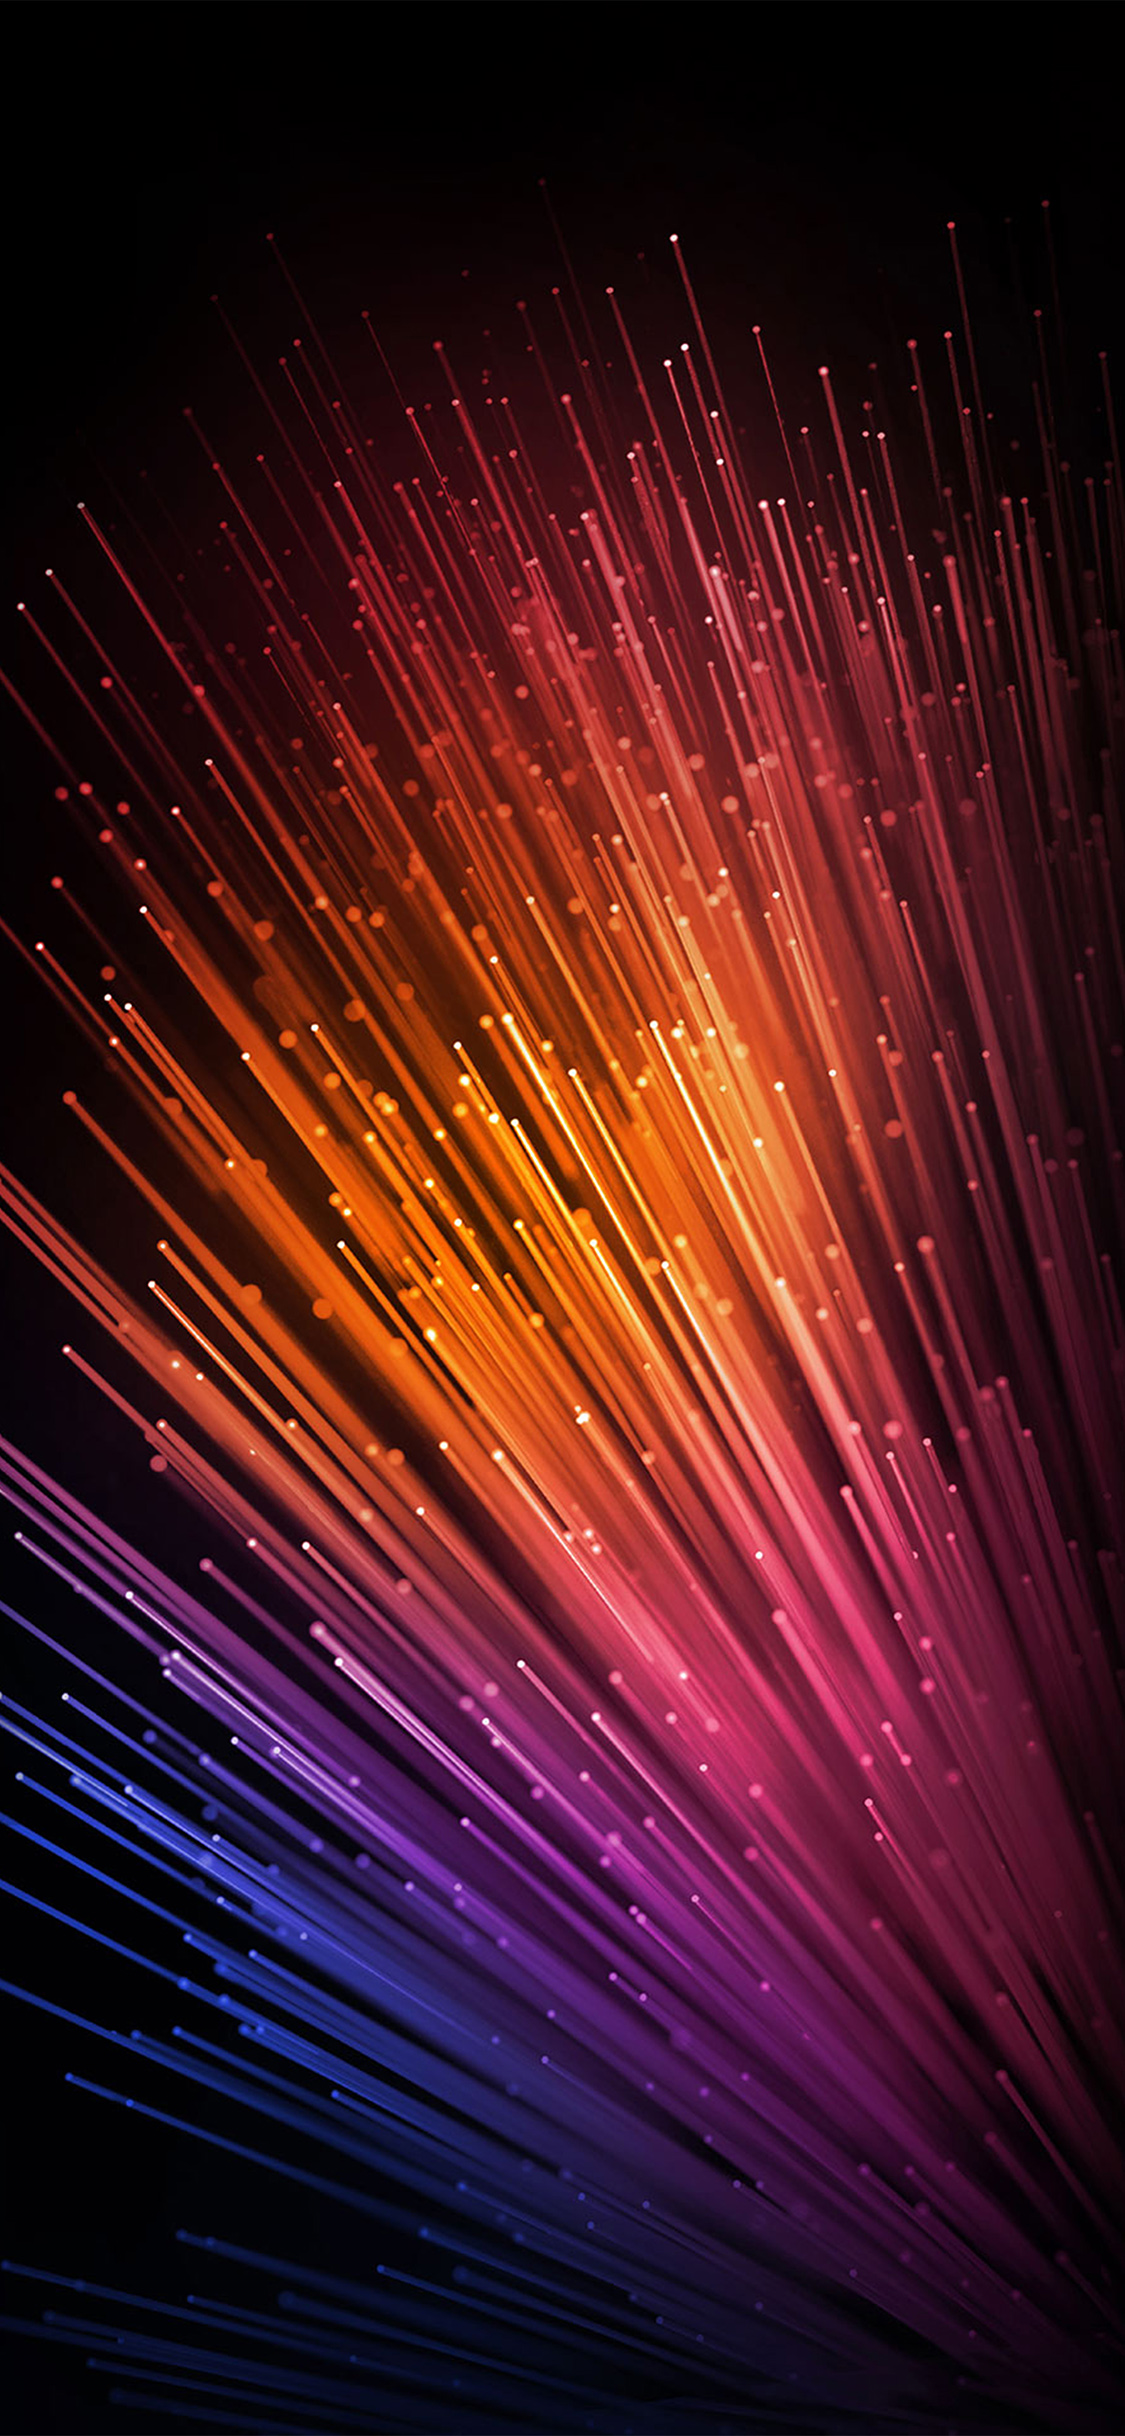 iPhone X wallpaper. simple rainbow line awesome pattern background